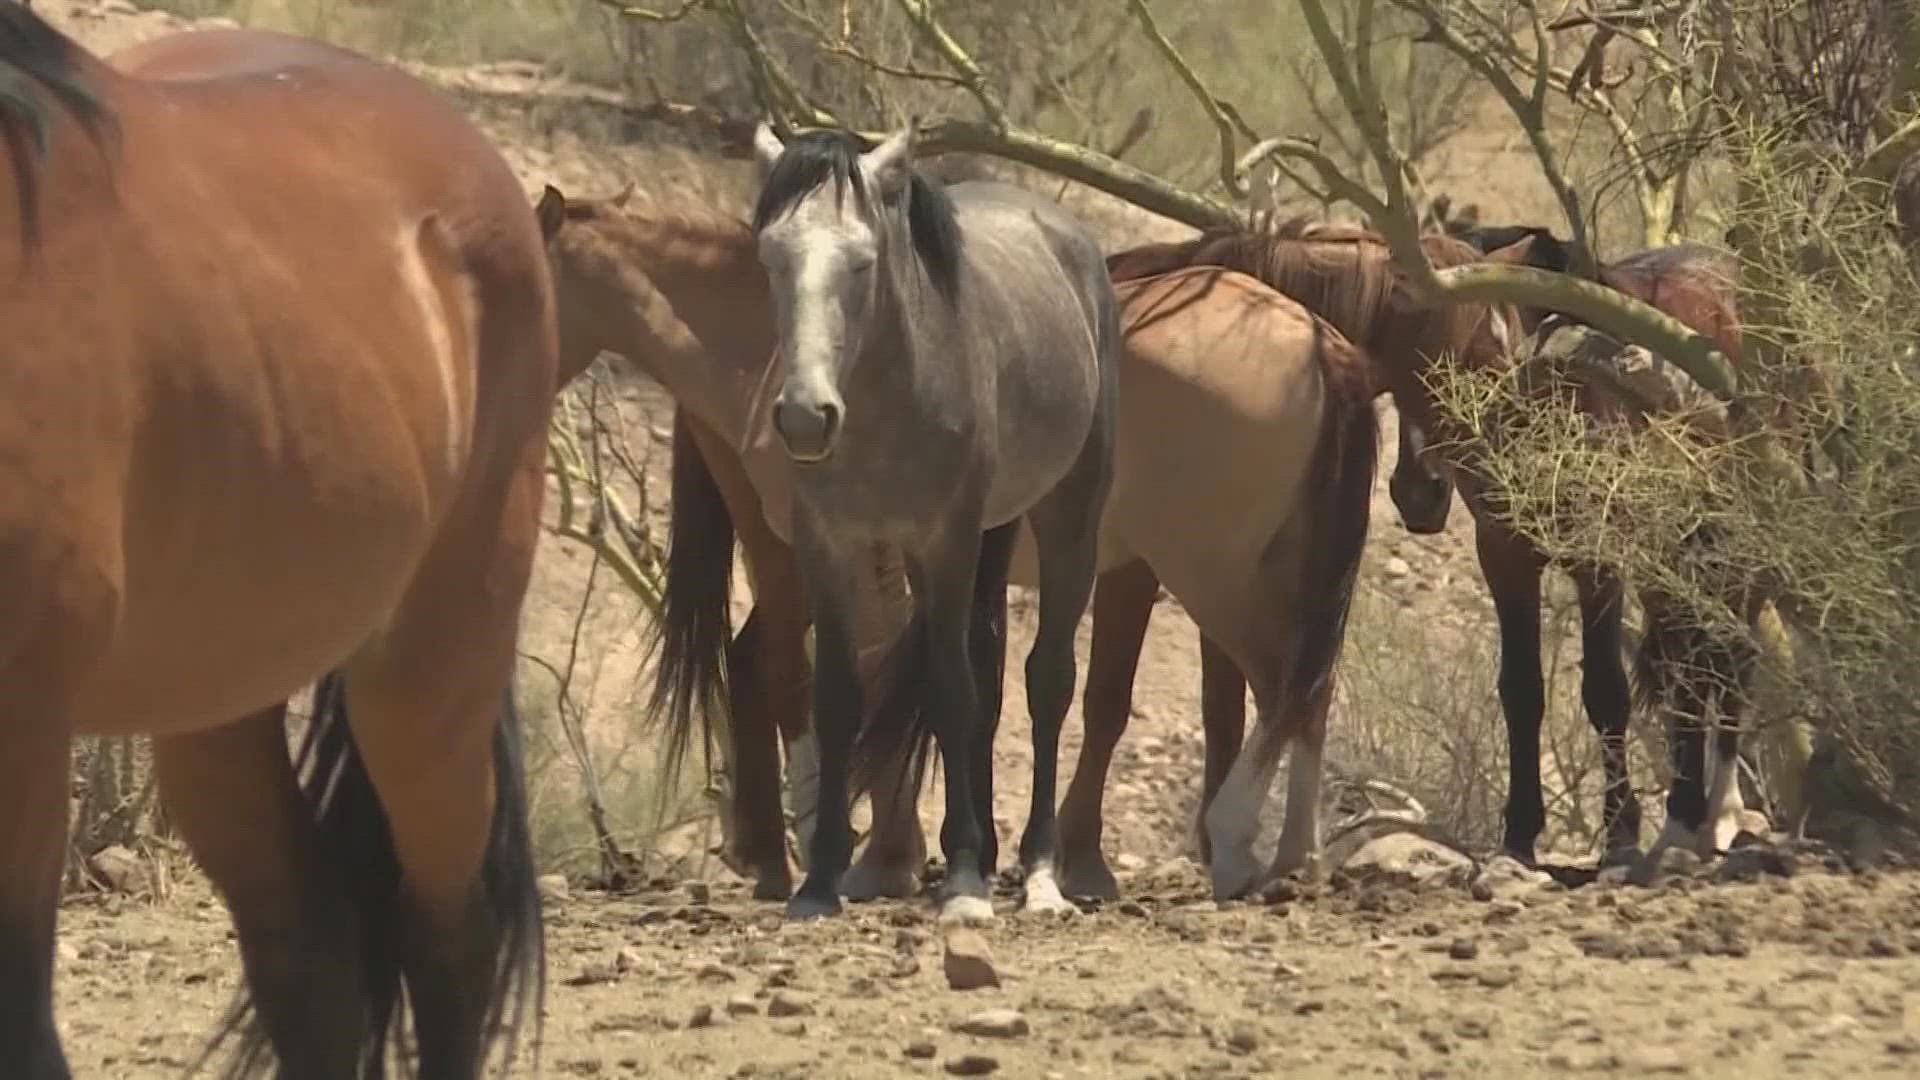 Wild horse rights advocates are calling on authorities to prosecute whoever is responsible for the reported killing of more than a dozen wild horses in Arizona.